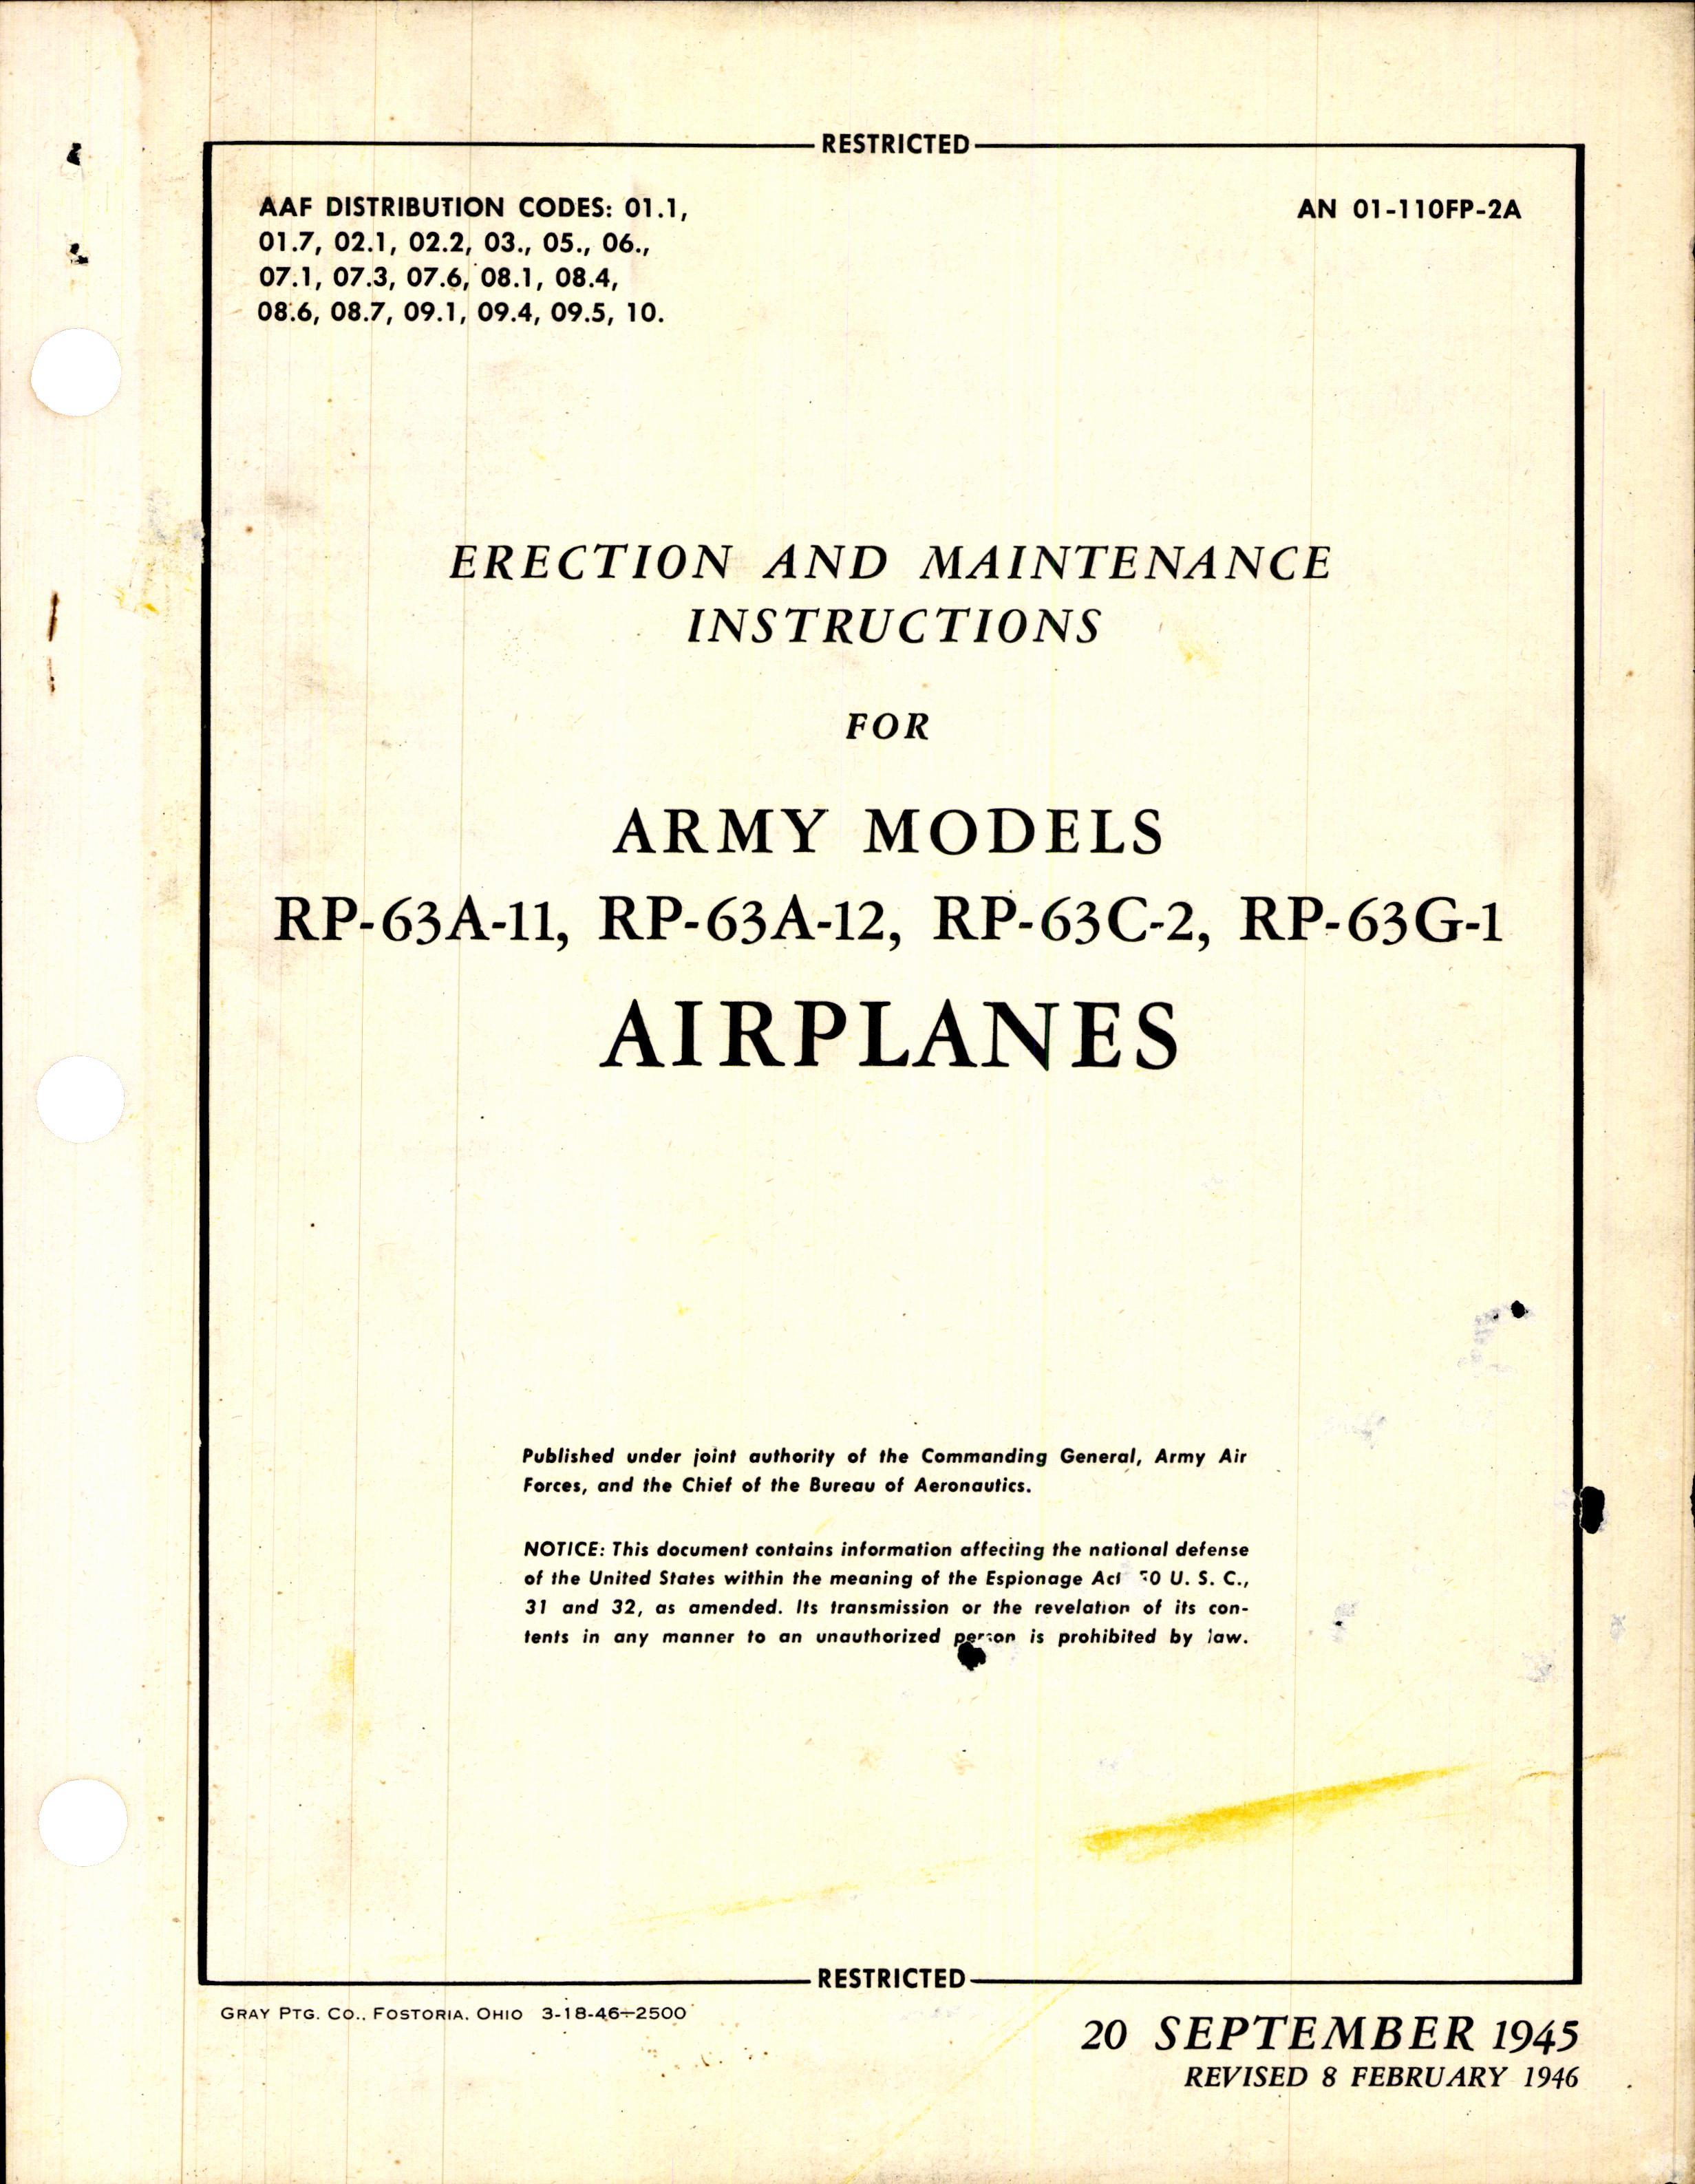 Sample page 1 from AirCorps Library document: Erection and Maintenance Instructions for RP-63A